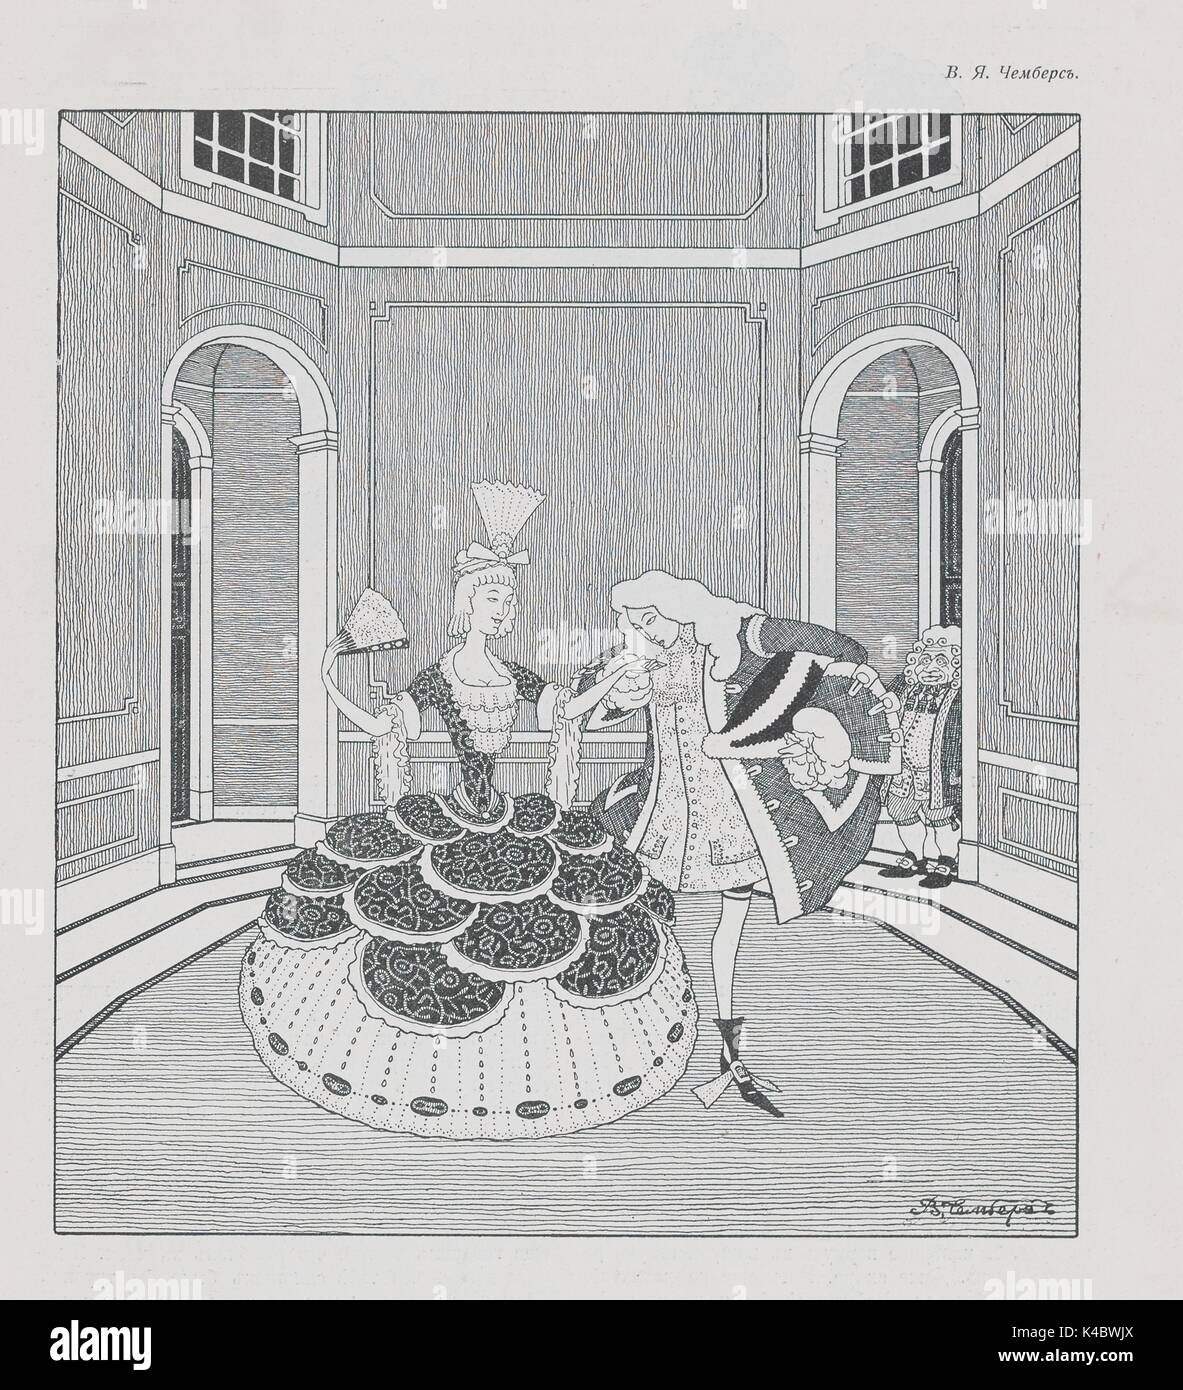 Cartoon from the Russian satirical journal Adskaia Pochta showing nobles in elaborate clothing dancing in a ballroom, with a servant peering in from the door, August 3, 2017. Stock Photo